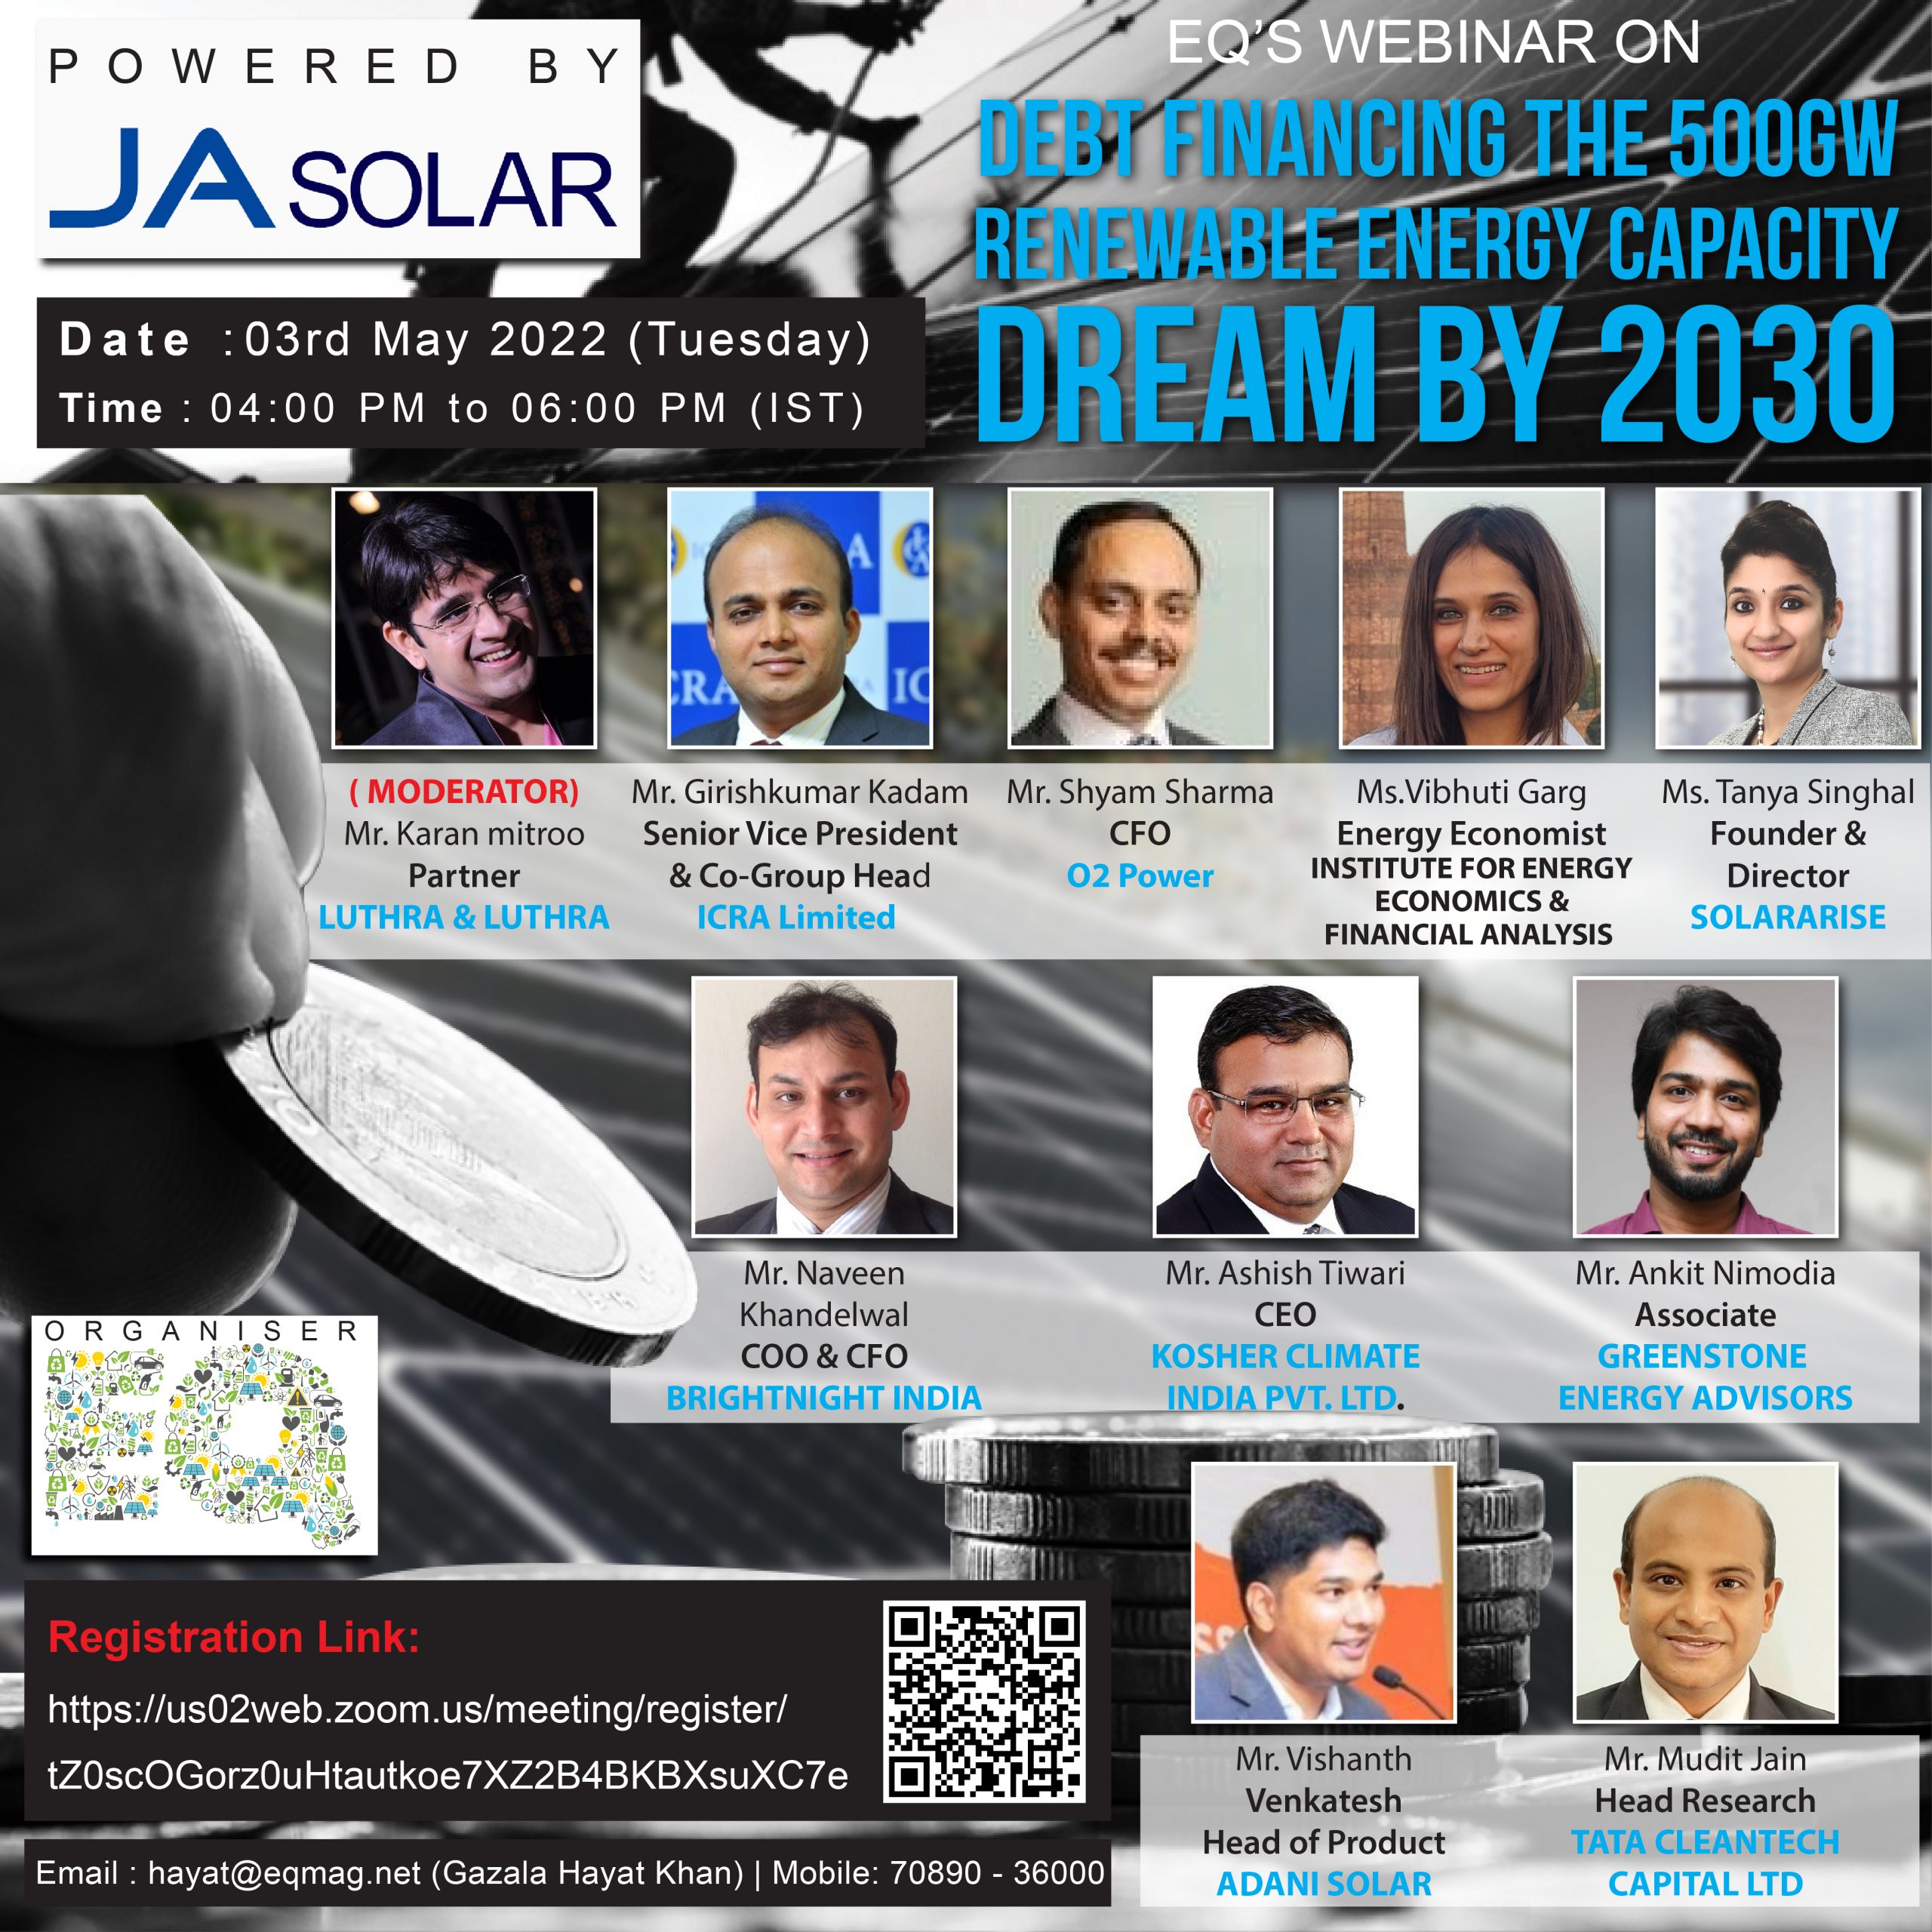 EQ Webinar on Debt Financing the 500GW Renewable Energy Capacity Dream by 2030 Powered by JA SOLAR 3rd May 2022 (Tuesday) 4:00 PM Onwards….Register Now!